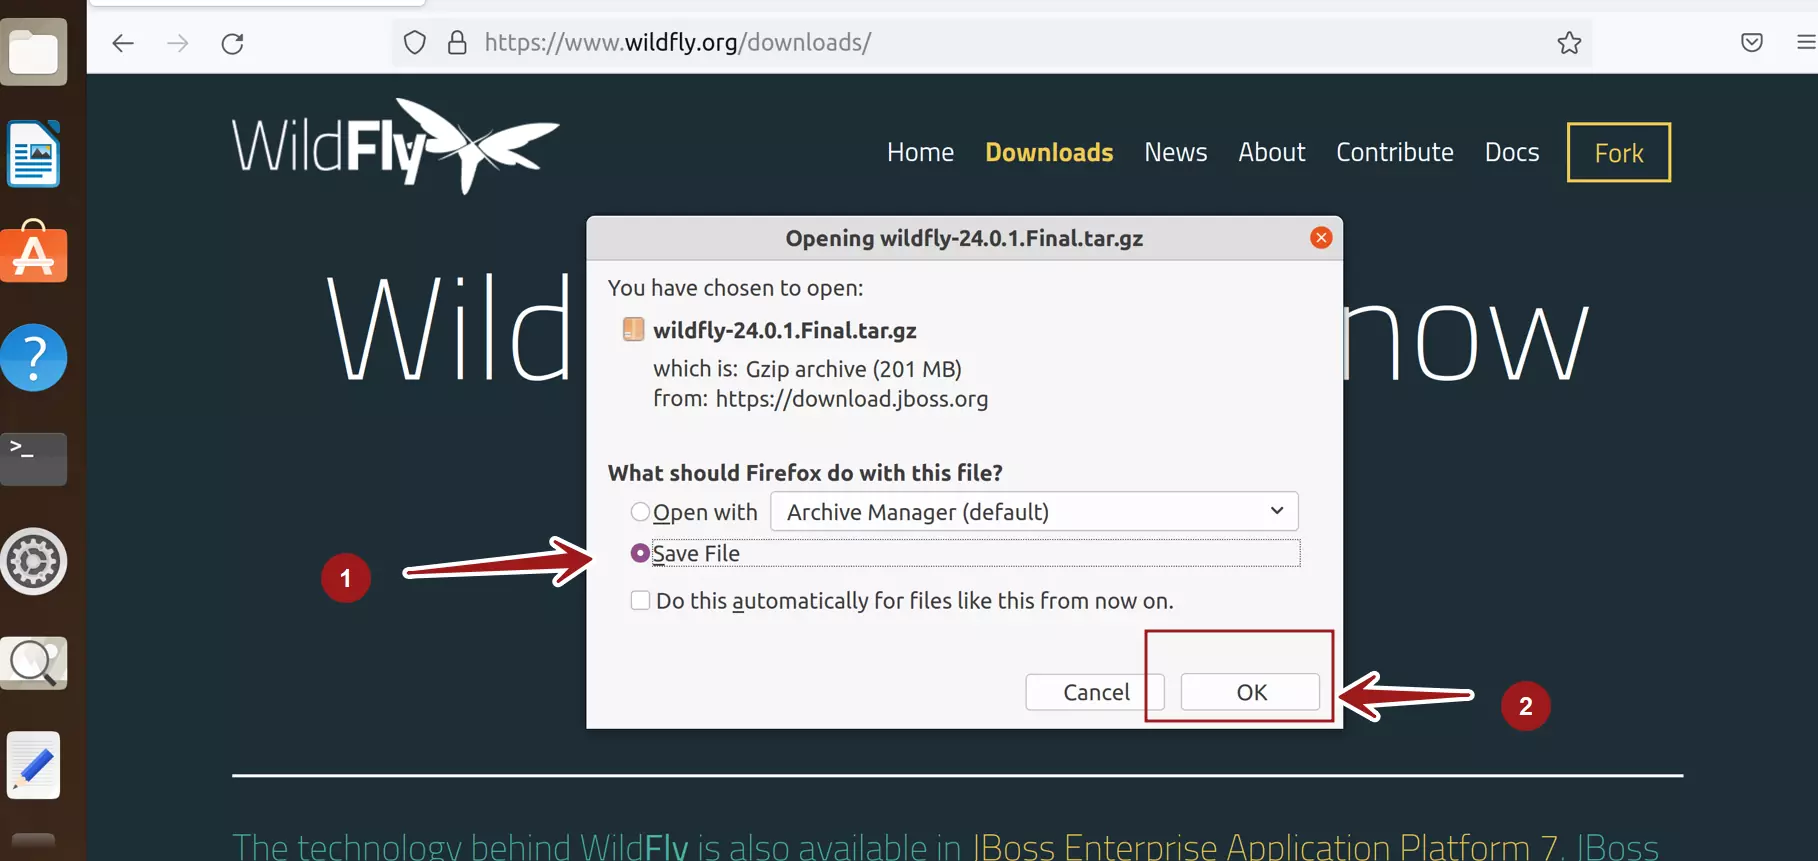 Wildfly Download Save File